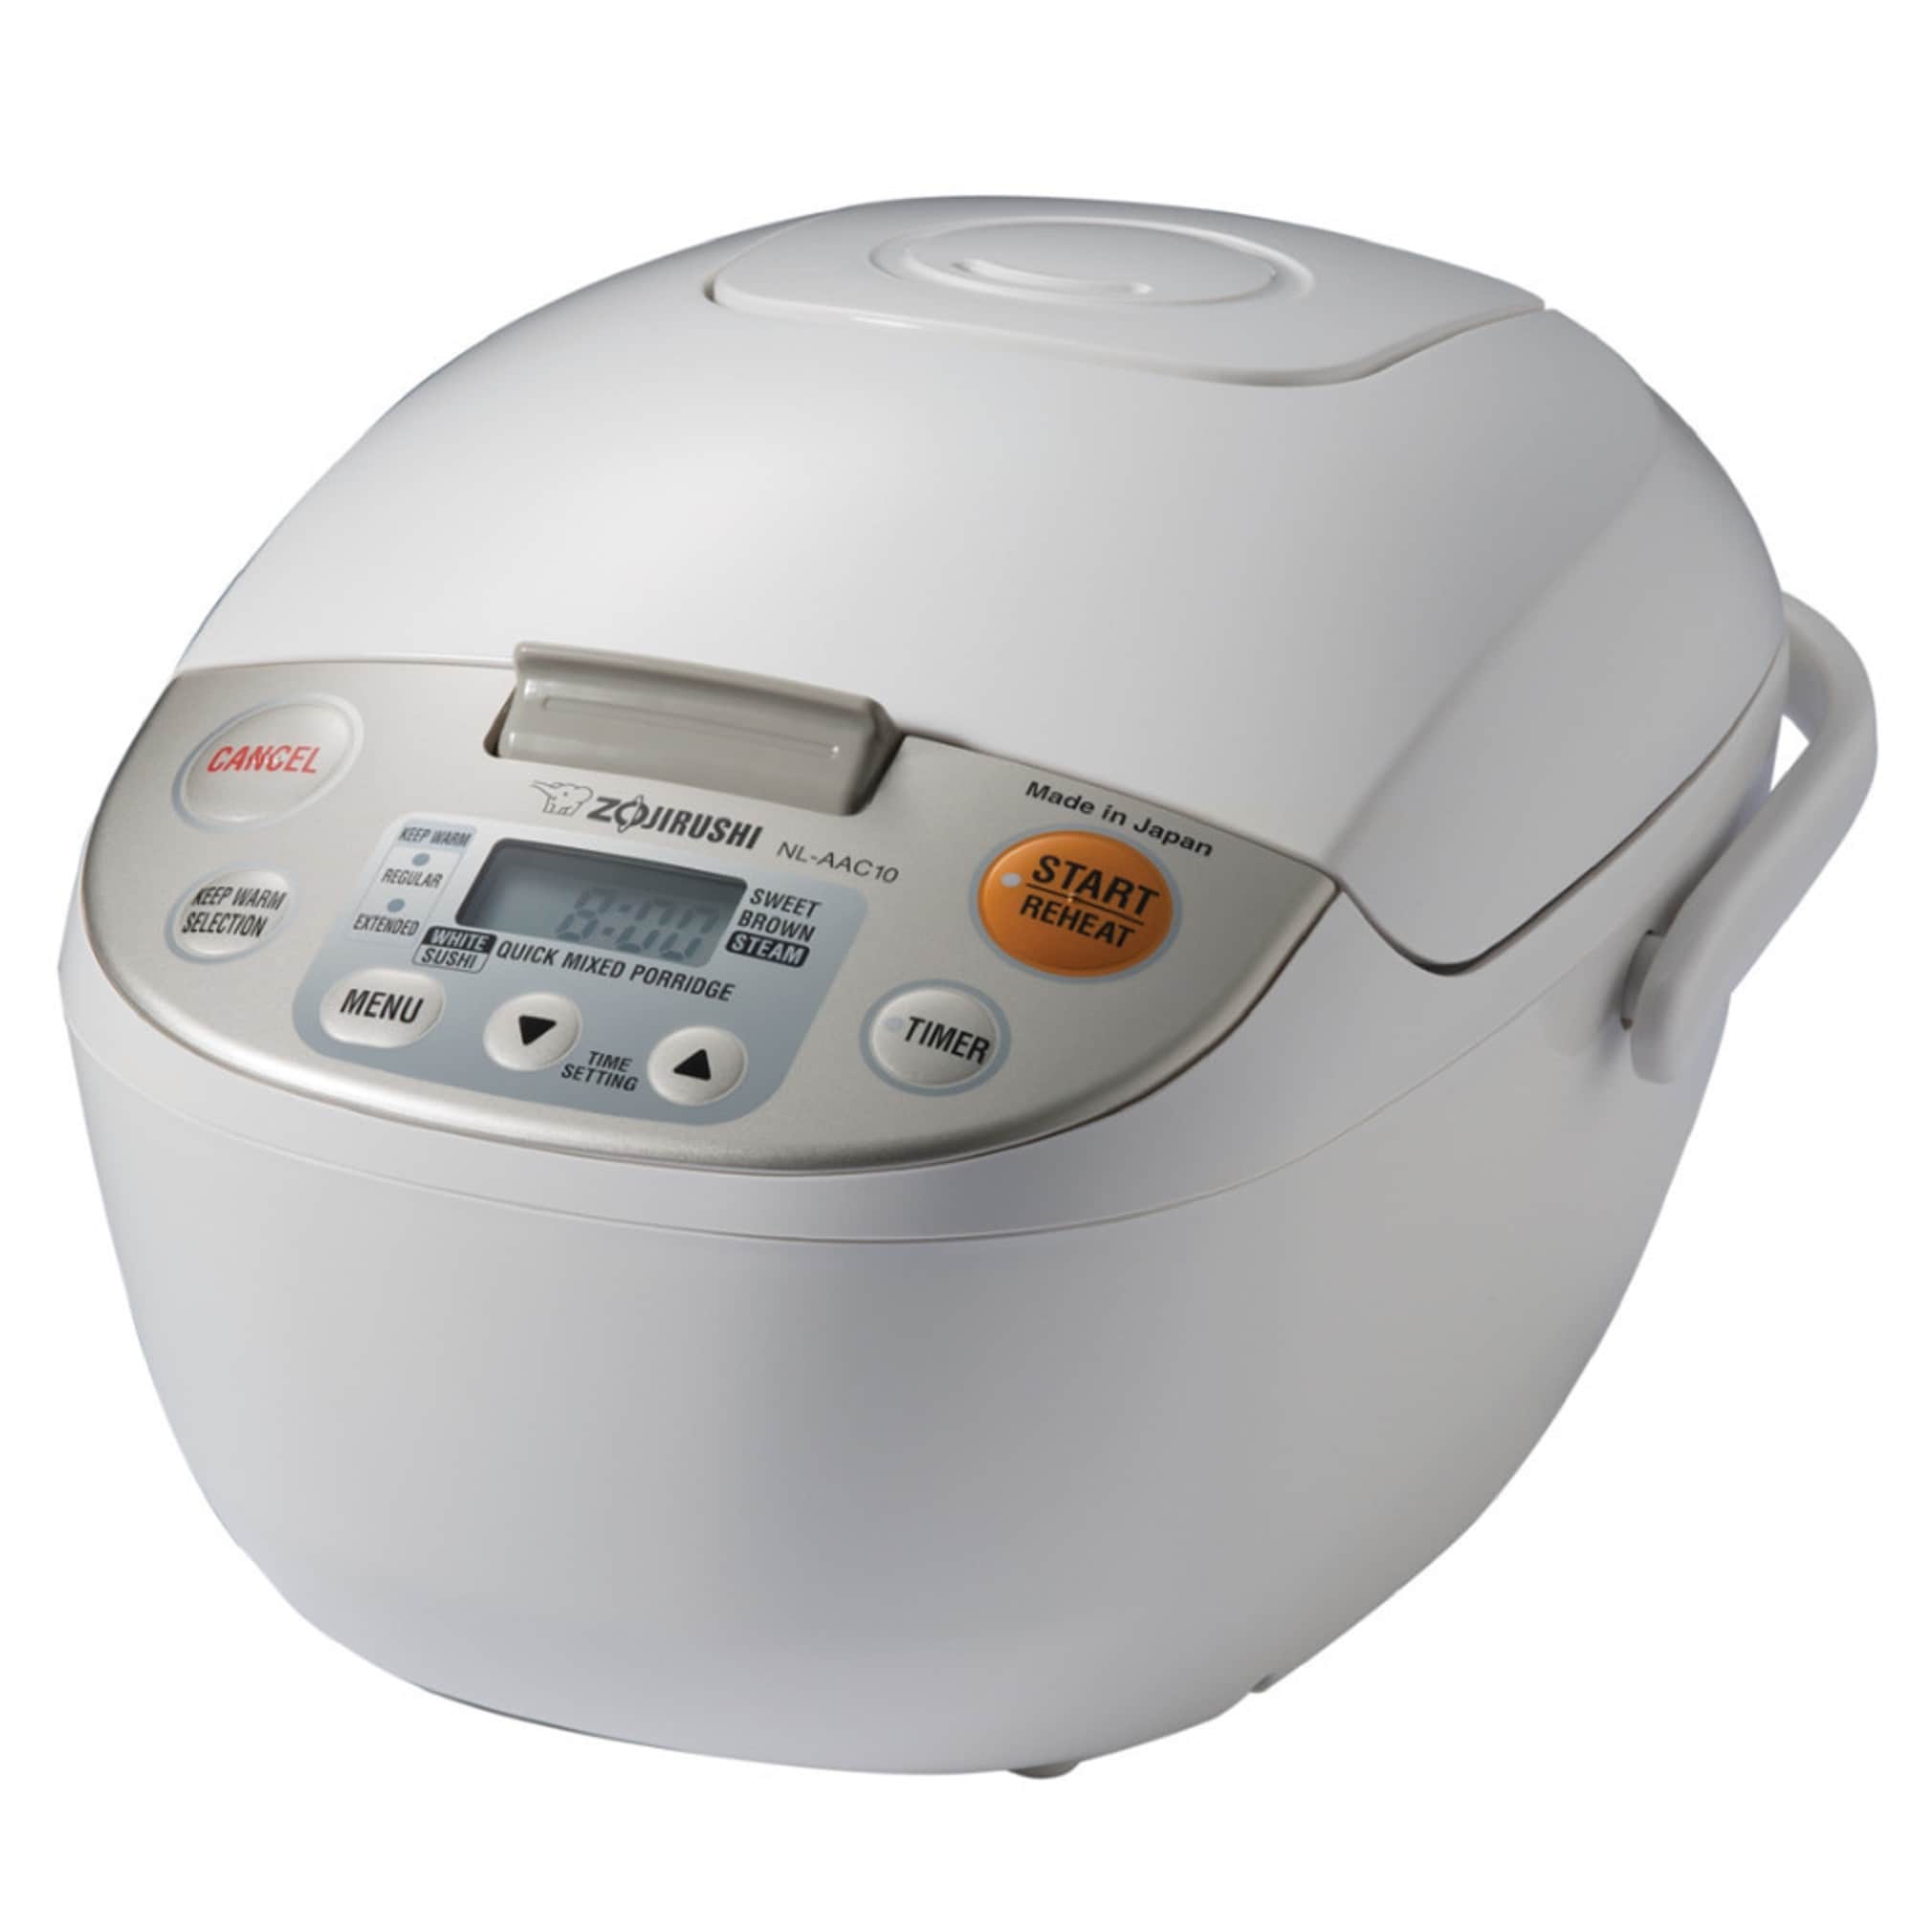 https://ak1.ostkcdn.com/images/products/is/images/direct/613a6879cd067387f6982294a029810d36233fd7/Zojirushi-Micom-Rice-Cooker-and-Warmer-%2810-Cup--Beige%29.jpg